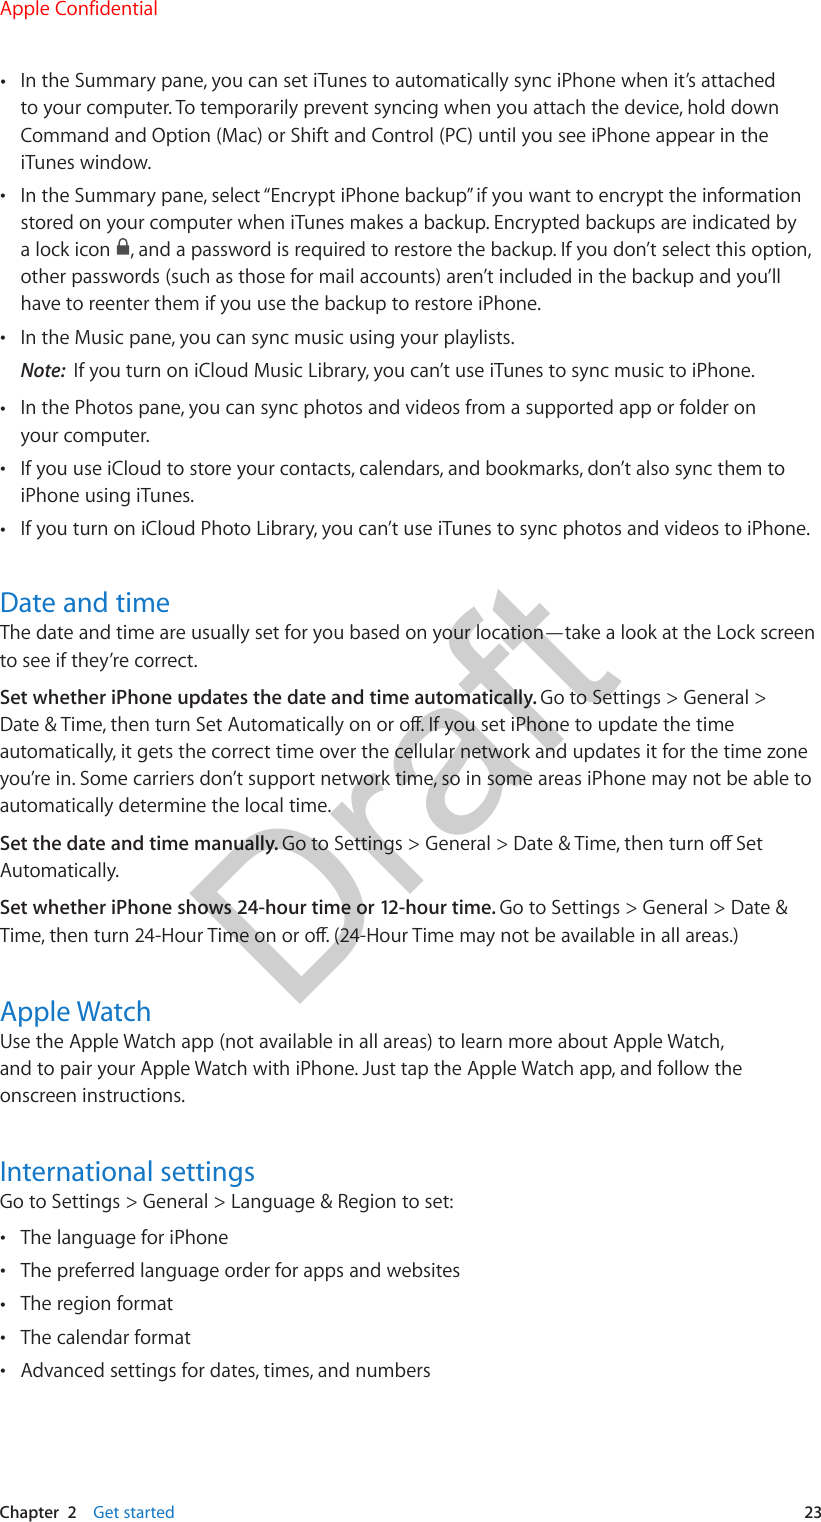 Chapter  2    Get started  23 •In the Summary pane, you can set iTunes to automatically sync iPhone when it’s attachedto your computer. To temporarily prevent syncing when you attach the device, hold downCommand and Option (Mac) or Shift and Control (PC) until you see iPhone appear in theiTunes window. •In the Summary pane, select “Encrypt iPhone backup” if you want to encrypt the informationstored on your computer when iTunes makes a backup. Encrypted backups are indicated bya lock icon  , and a password is required to restore the backup. If you don’t select this option,other passwords (such as those for mail accounts) aren’t included in the backup and you’llhave to reenter them if you use the backup to restore iPhone. •In the Music pane, you can sync music using your playlists.Note:  If you turn on iCloud Music Library, you can’t use iTunes to sync music to iPhone. •In the Photos pane, you can sync photos and videos from a supported app or folder onyour computer. •If you use iCloud to store your contacts, calendars, and bookmarks, don’t also sync them toiPhone using iTunes. •If you turn on iCloud Photo Library, you can’t use iTunes to sync photos and videos to iPhone.Date and timeThe date and time are usually set for you based on your location—take a look at the Lock screen to see if they’re correct. Set whether iPhone updates the date and time automatically. Go to Settings &gt; General &gt; Date &amp; Time, then turn Set Automatically on or o. If you set iPhone to update the time automatically, it gets the correct time over the cellular network and updates it for the time zone you’re in. Some carriers don’t support network time, so in some areas iPhone may not be able to automatically determine the local time.Set the date and time manually. Go to Settings &gt; General &gt; Date &amp; Time, then turn o Set Automatically. Set whether iPhone shows 24-hour time or 12-hour time. Go to Settings &gt; General &gt; Date &amp; Time, then turn 24-Hour Time on or o. (24-Hour Time may not be available in all areas.)Apple WatchUse the Apple Watch app (not available in all areas) to learn more about Apple Watch, and to pair your Apple Watch with iPhone. Just tap the Apple Watch app, and follow the onscreen instructions.International settingsGo to Settings &gt; General &gt; Language &amp; Region to set: •The language for iPhone •The preferred language order for apps and websites •The region format •The calendar format •Advanced settings for dates, times, and numbersApple ConfidentialDraft